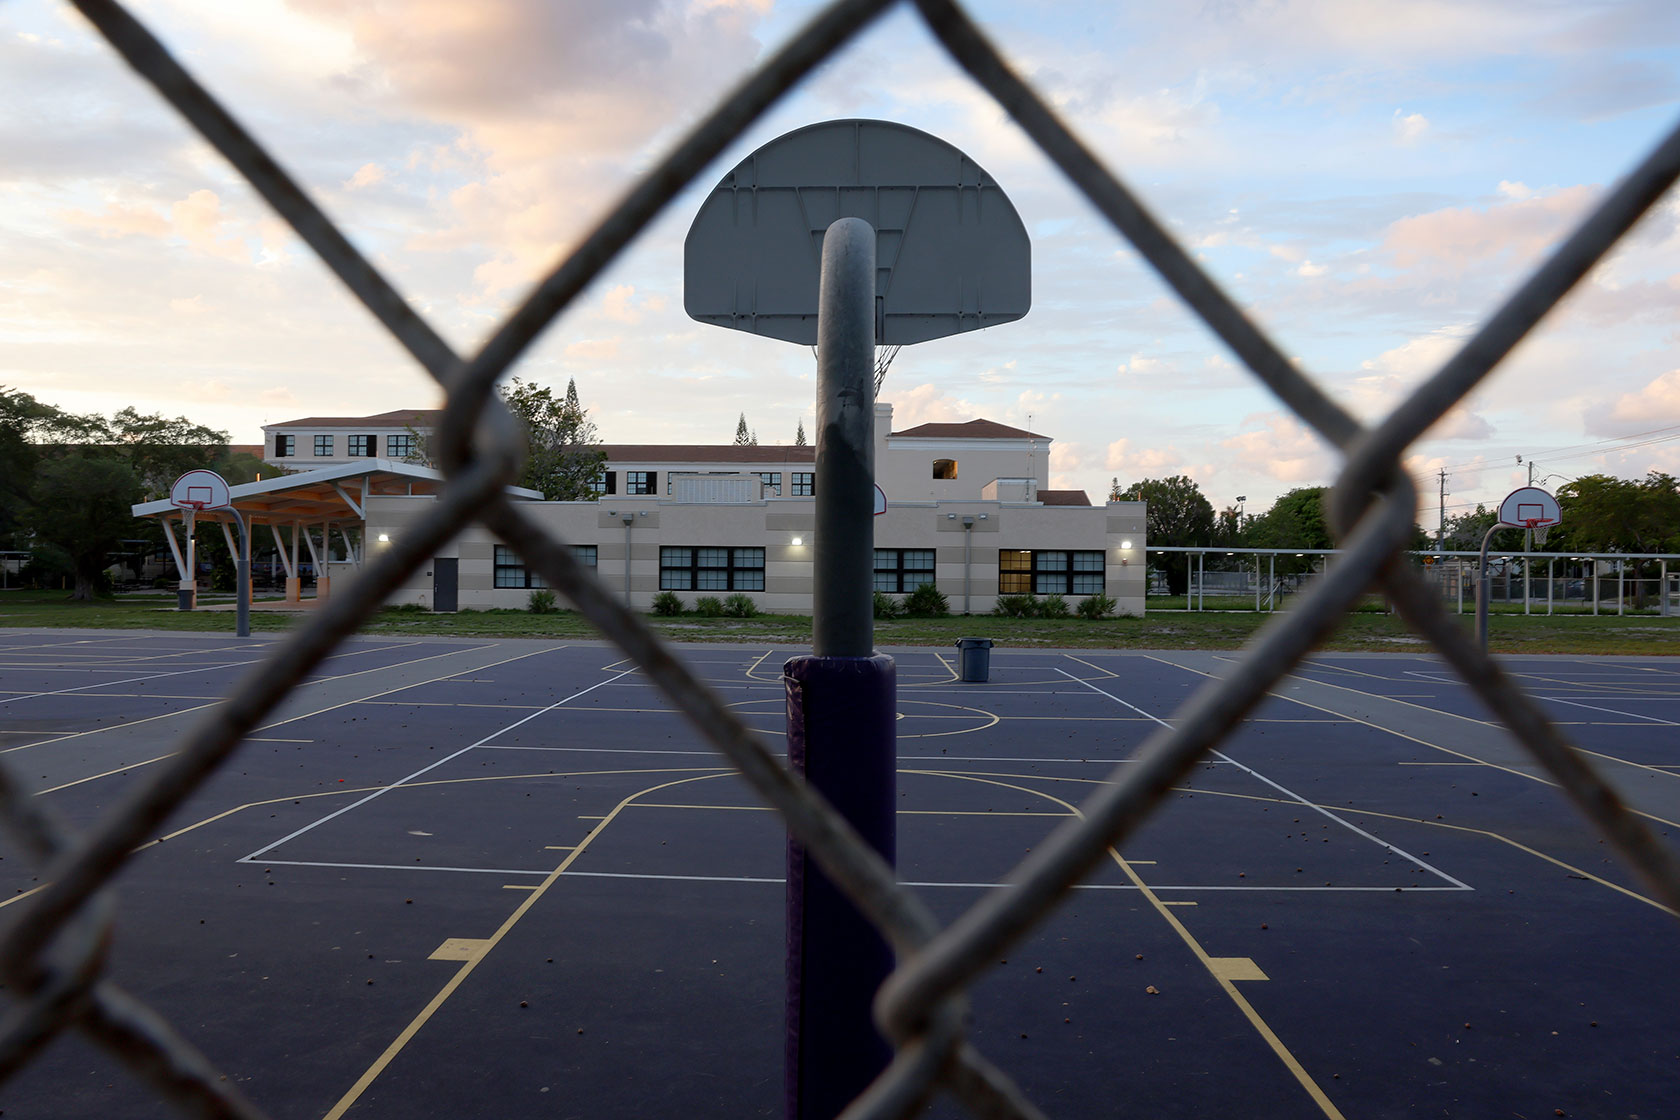 Photo shows an empty basketball court facing a one-story white school, with a chainlink fence between the camera lens and the basketball court